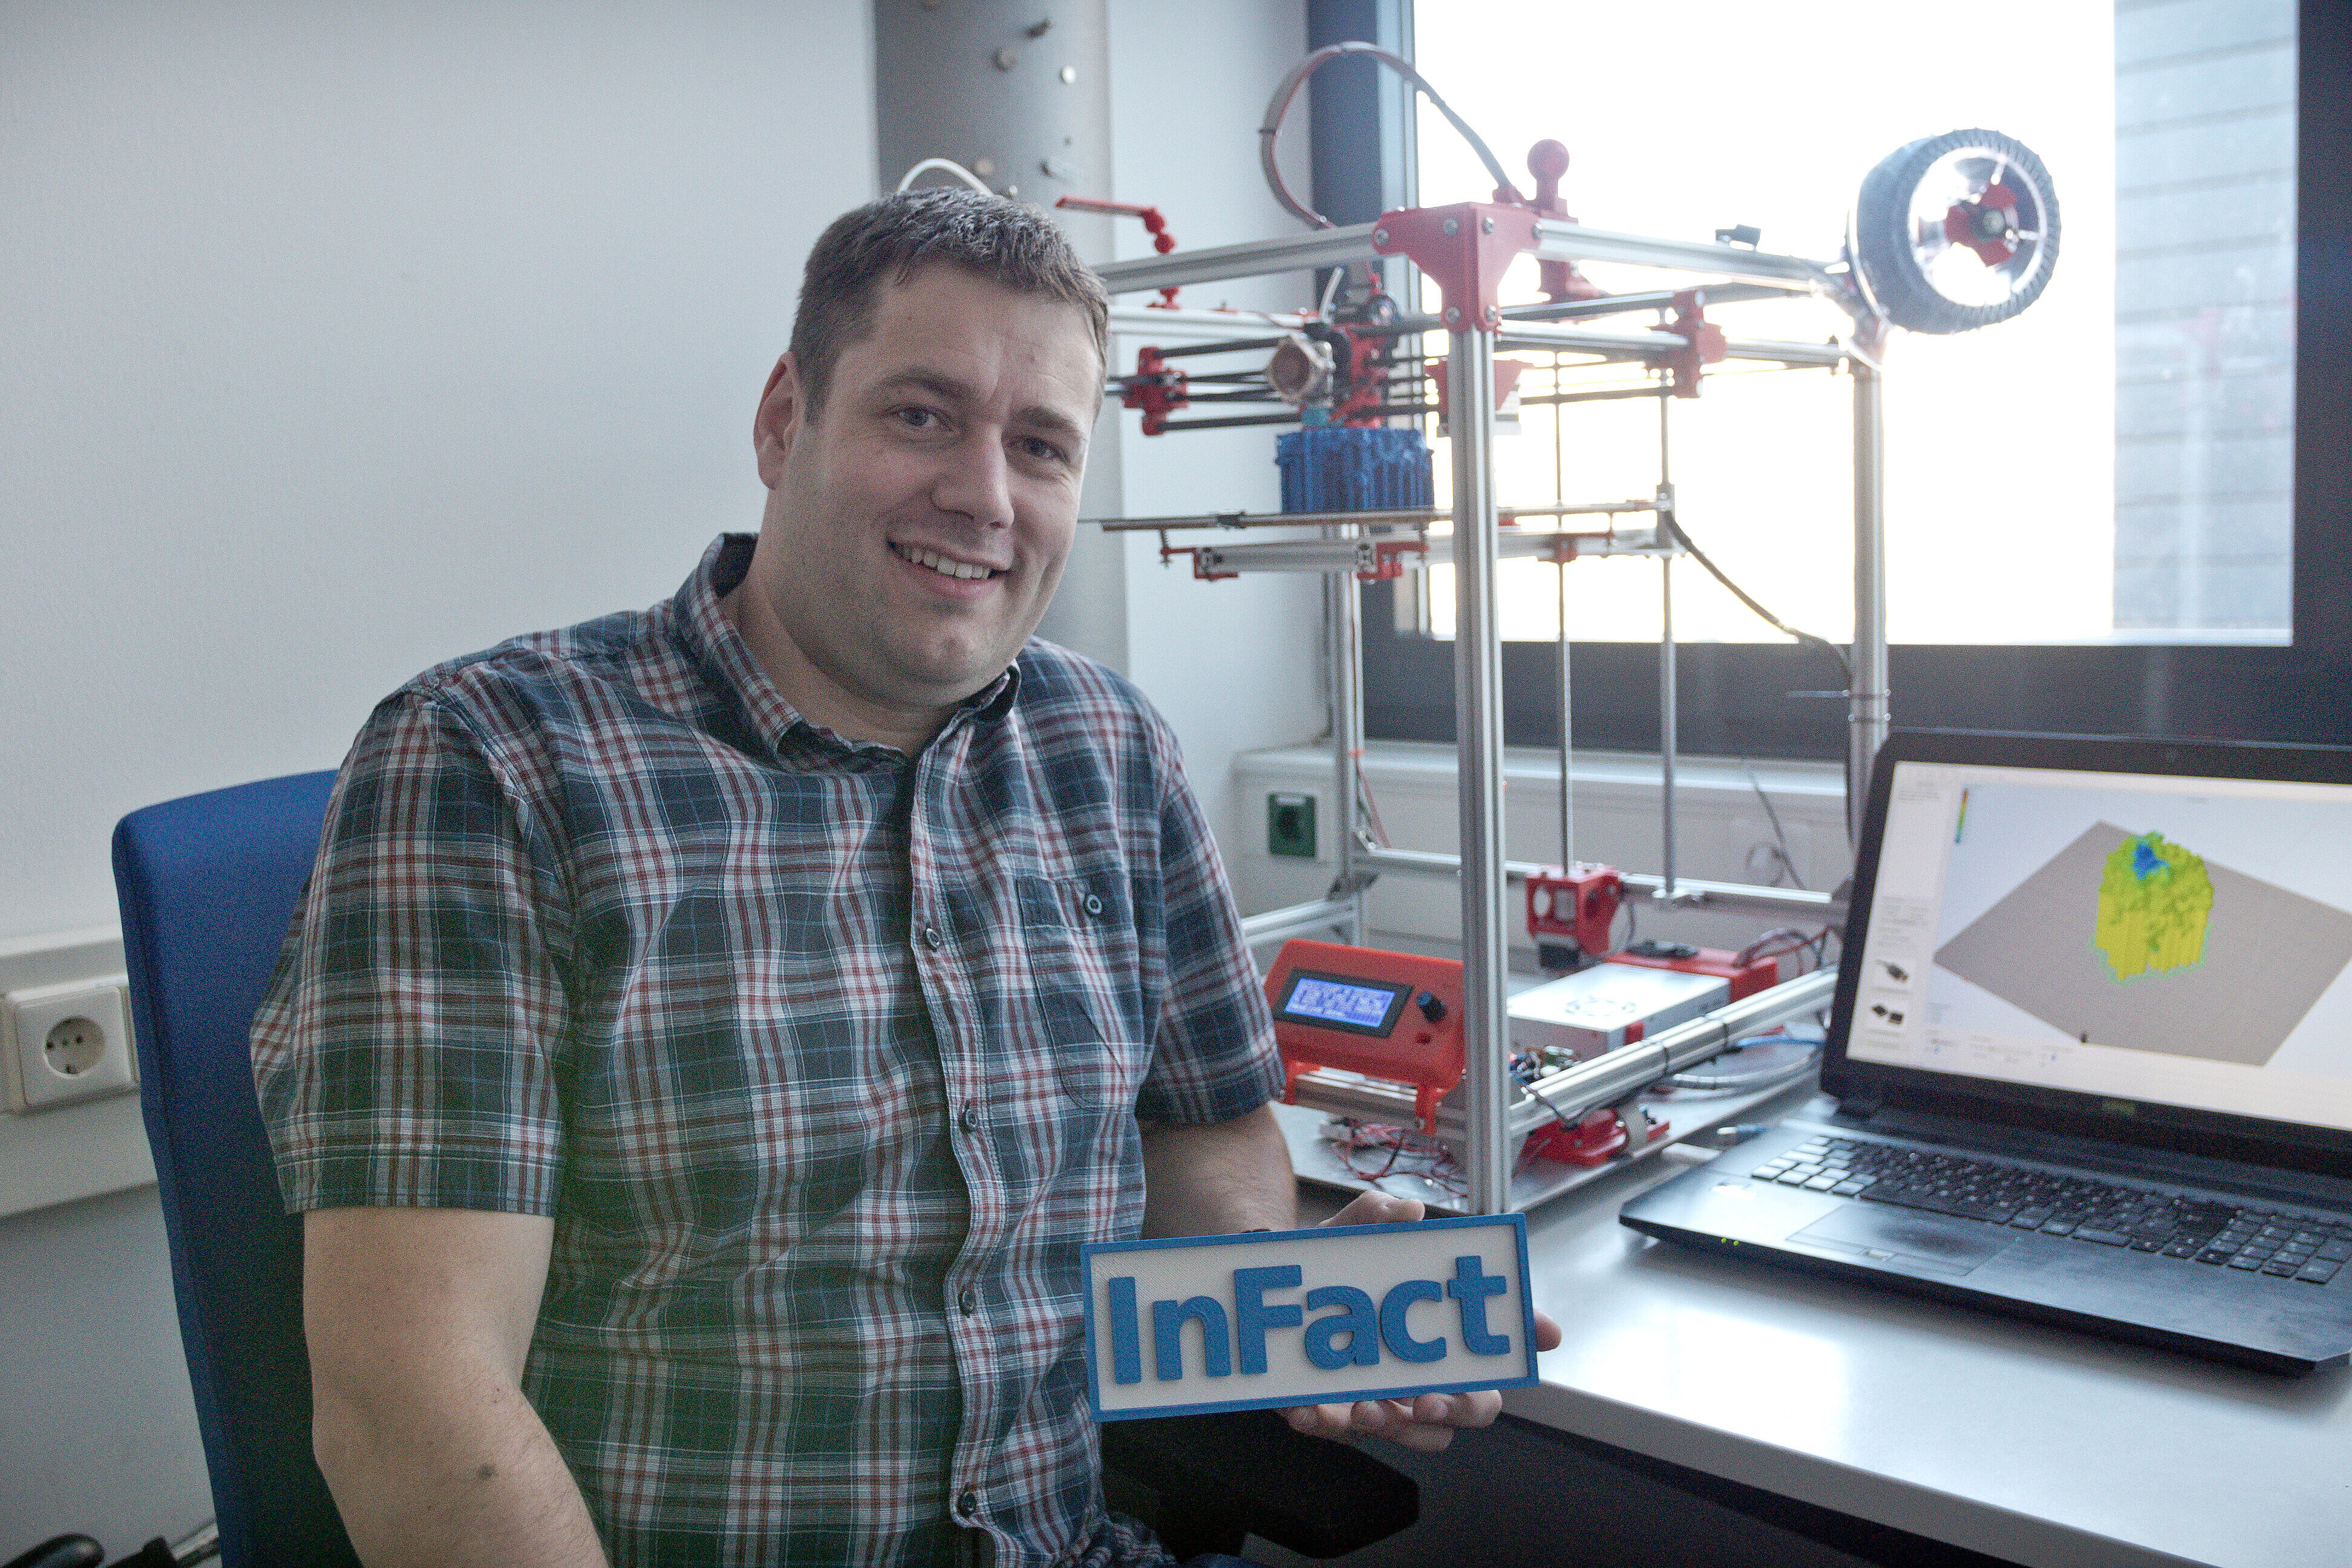 Stefan Schmelz at his desk with 3D printer and laptop